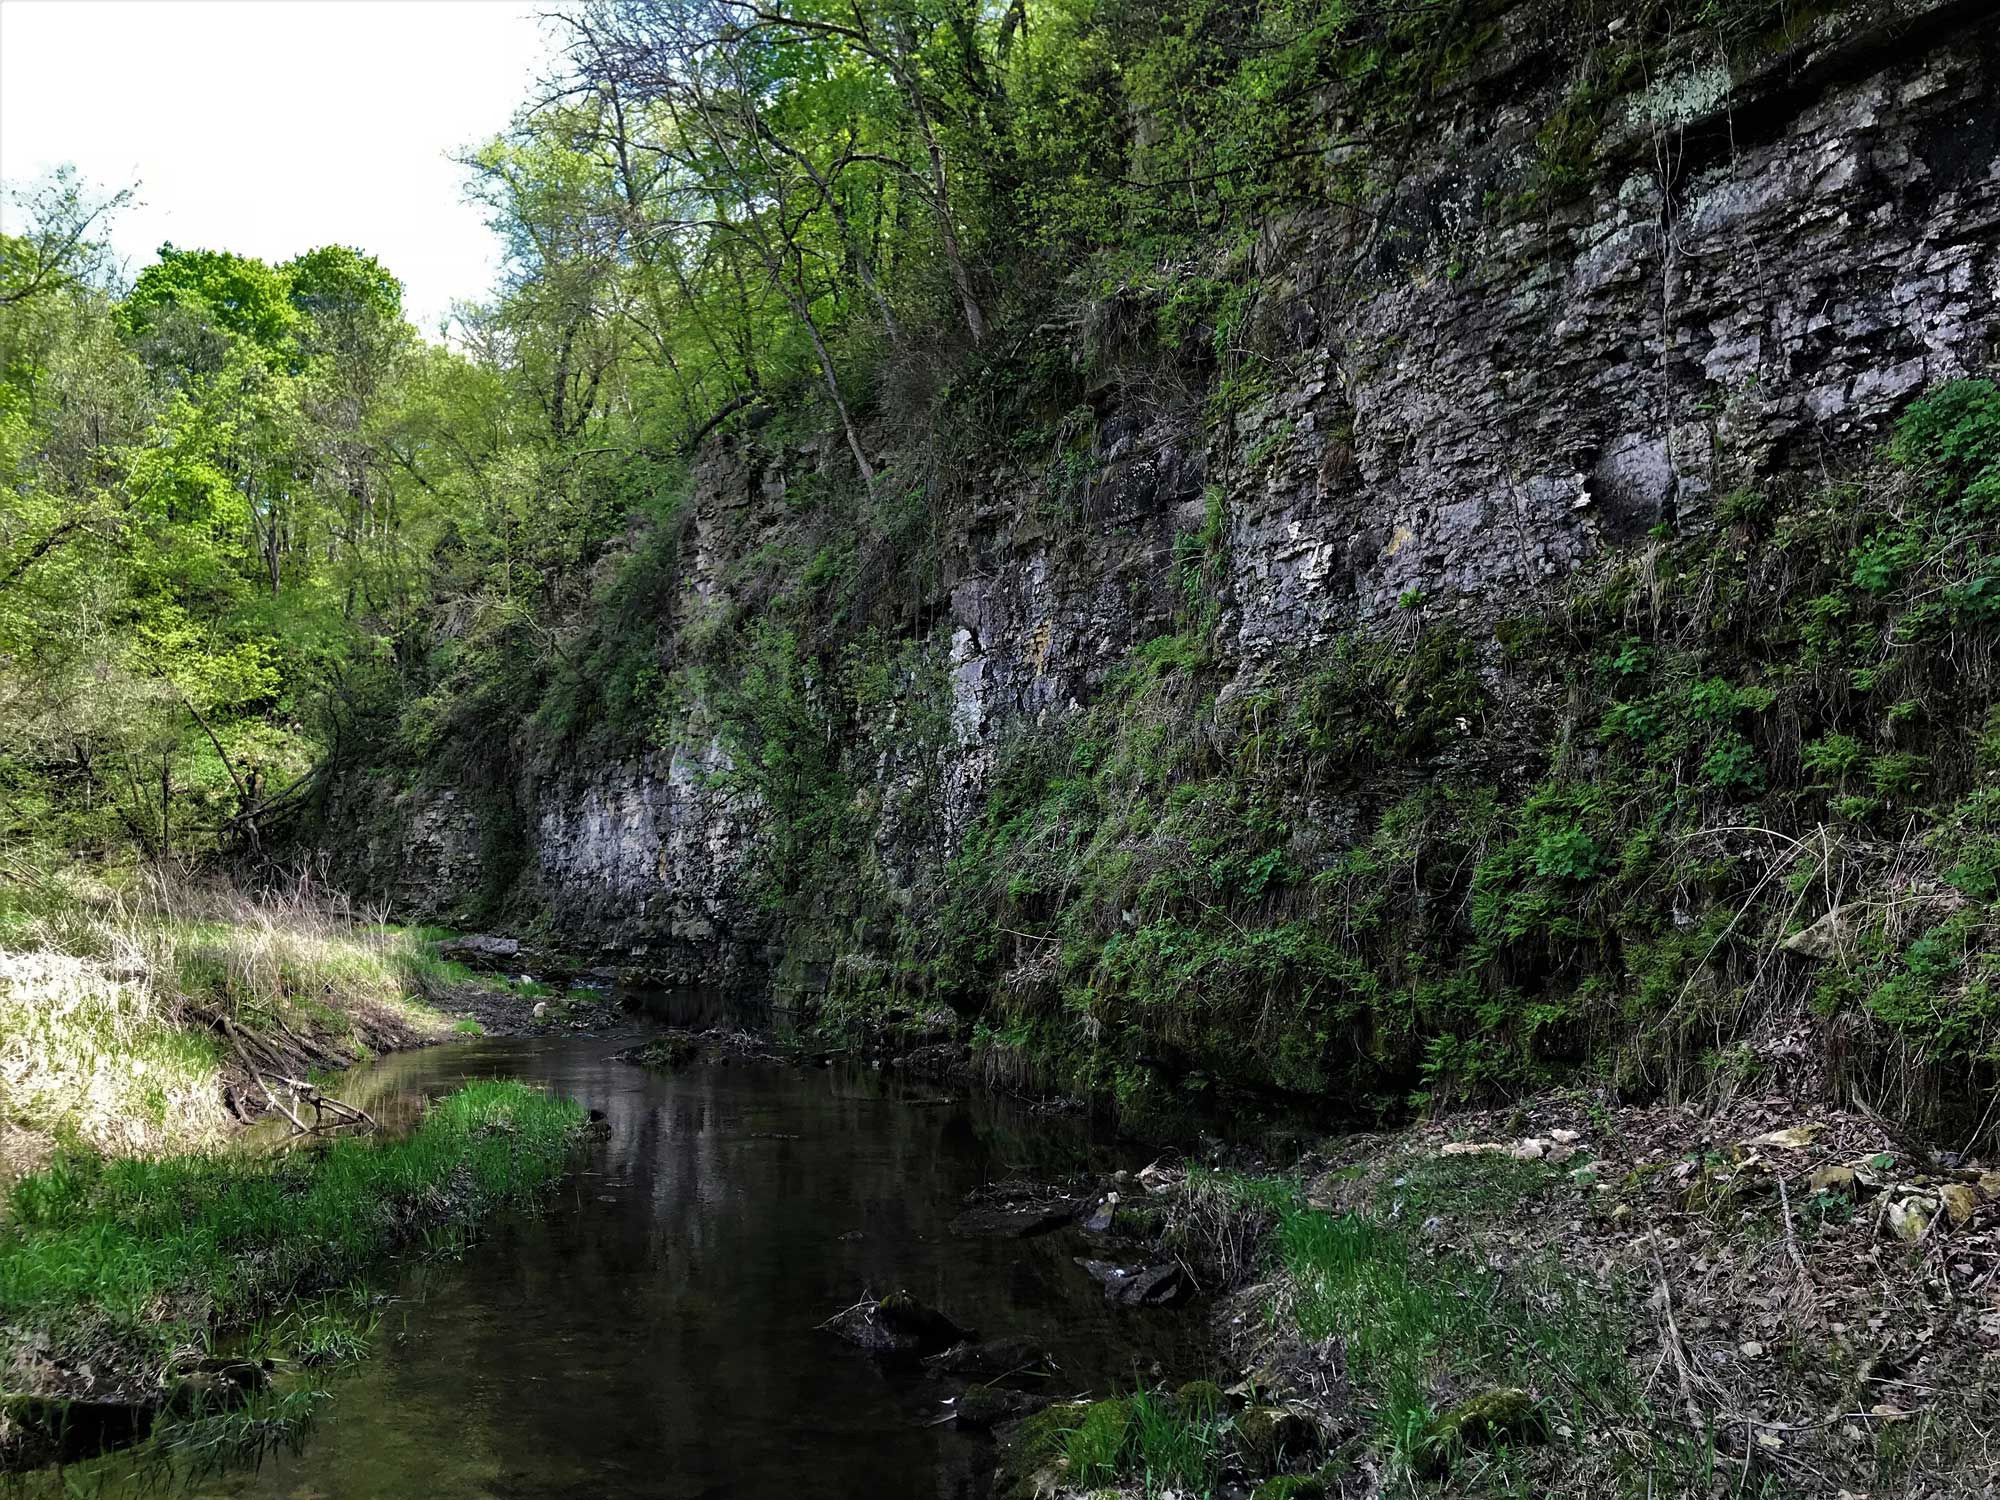 Photograph of an algific talus slope in Iowa. The photo shows a cliff of gray rock partially covered in vegetation and topped by trees at left, with a small creek running along its base.